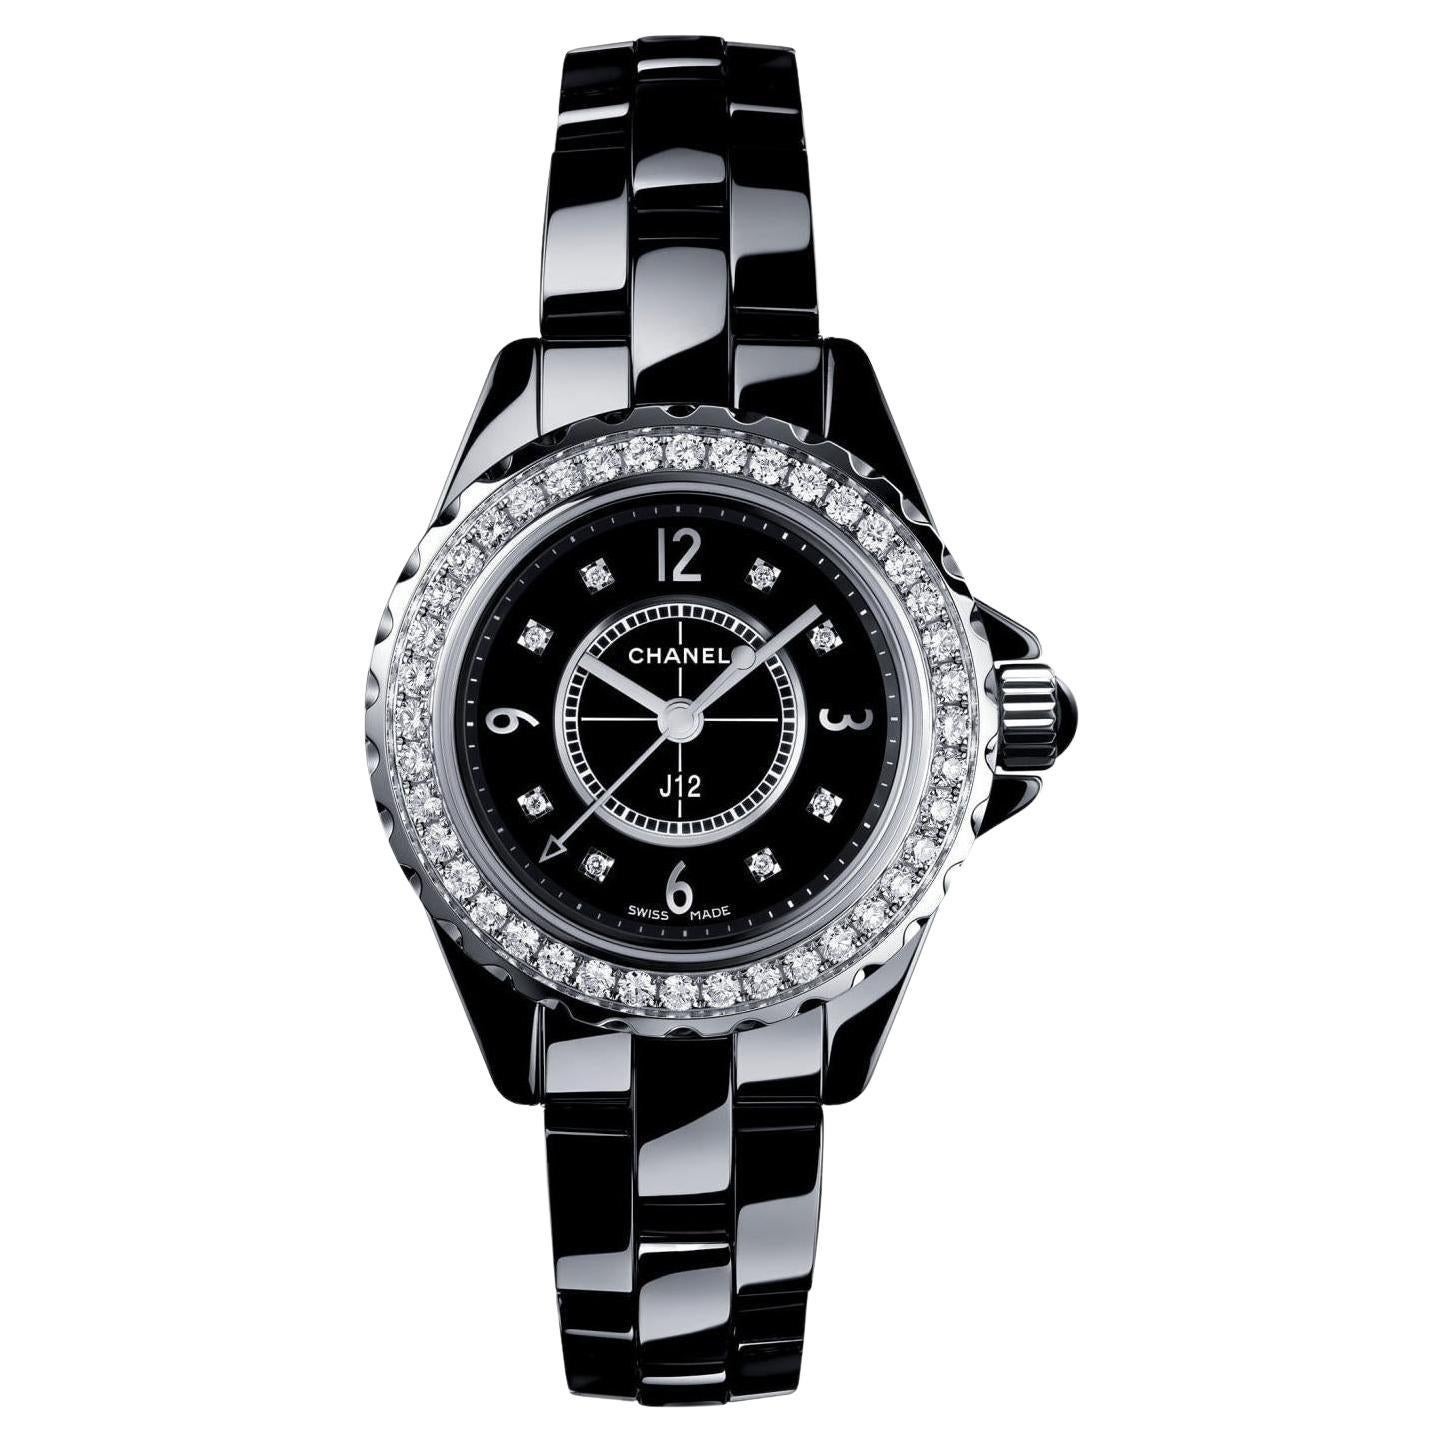 Chanel J12 Black Ceramic 35mm Watch for $2,685 for sale from a Private  Seller on Chrono24